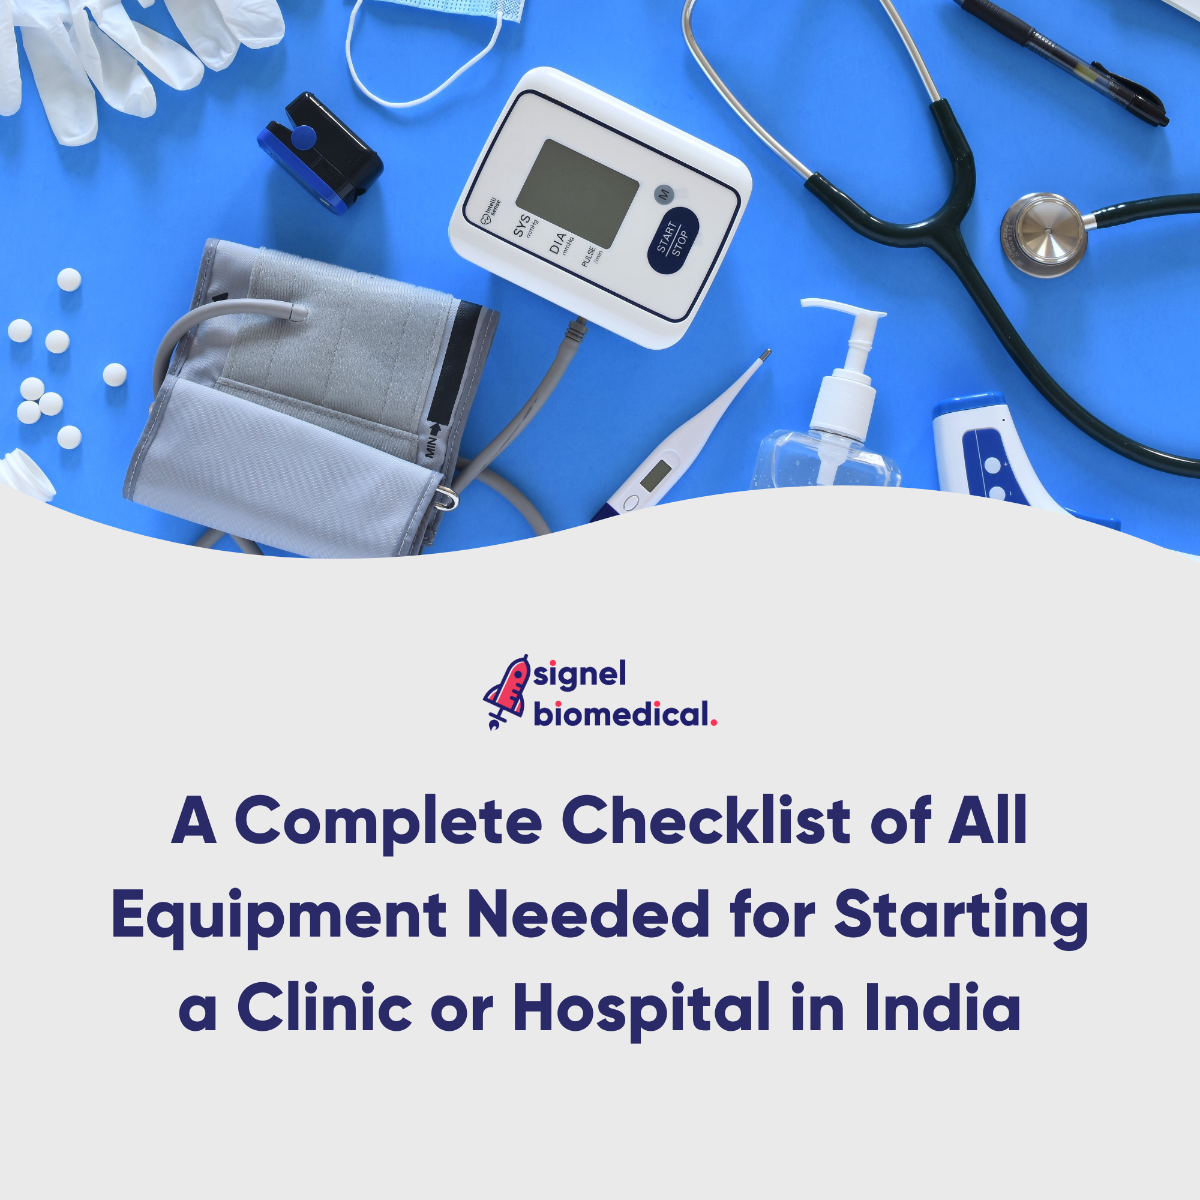 All Equipment Needed for Starting a Clinic or Hospital in India